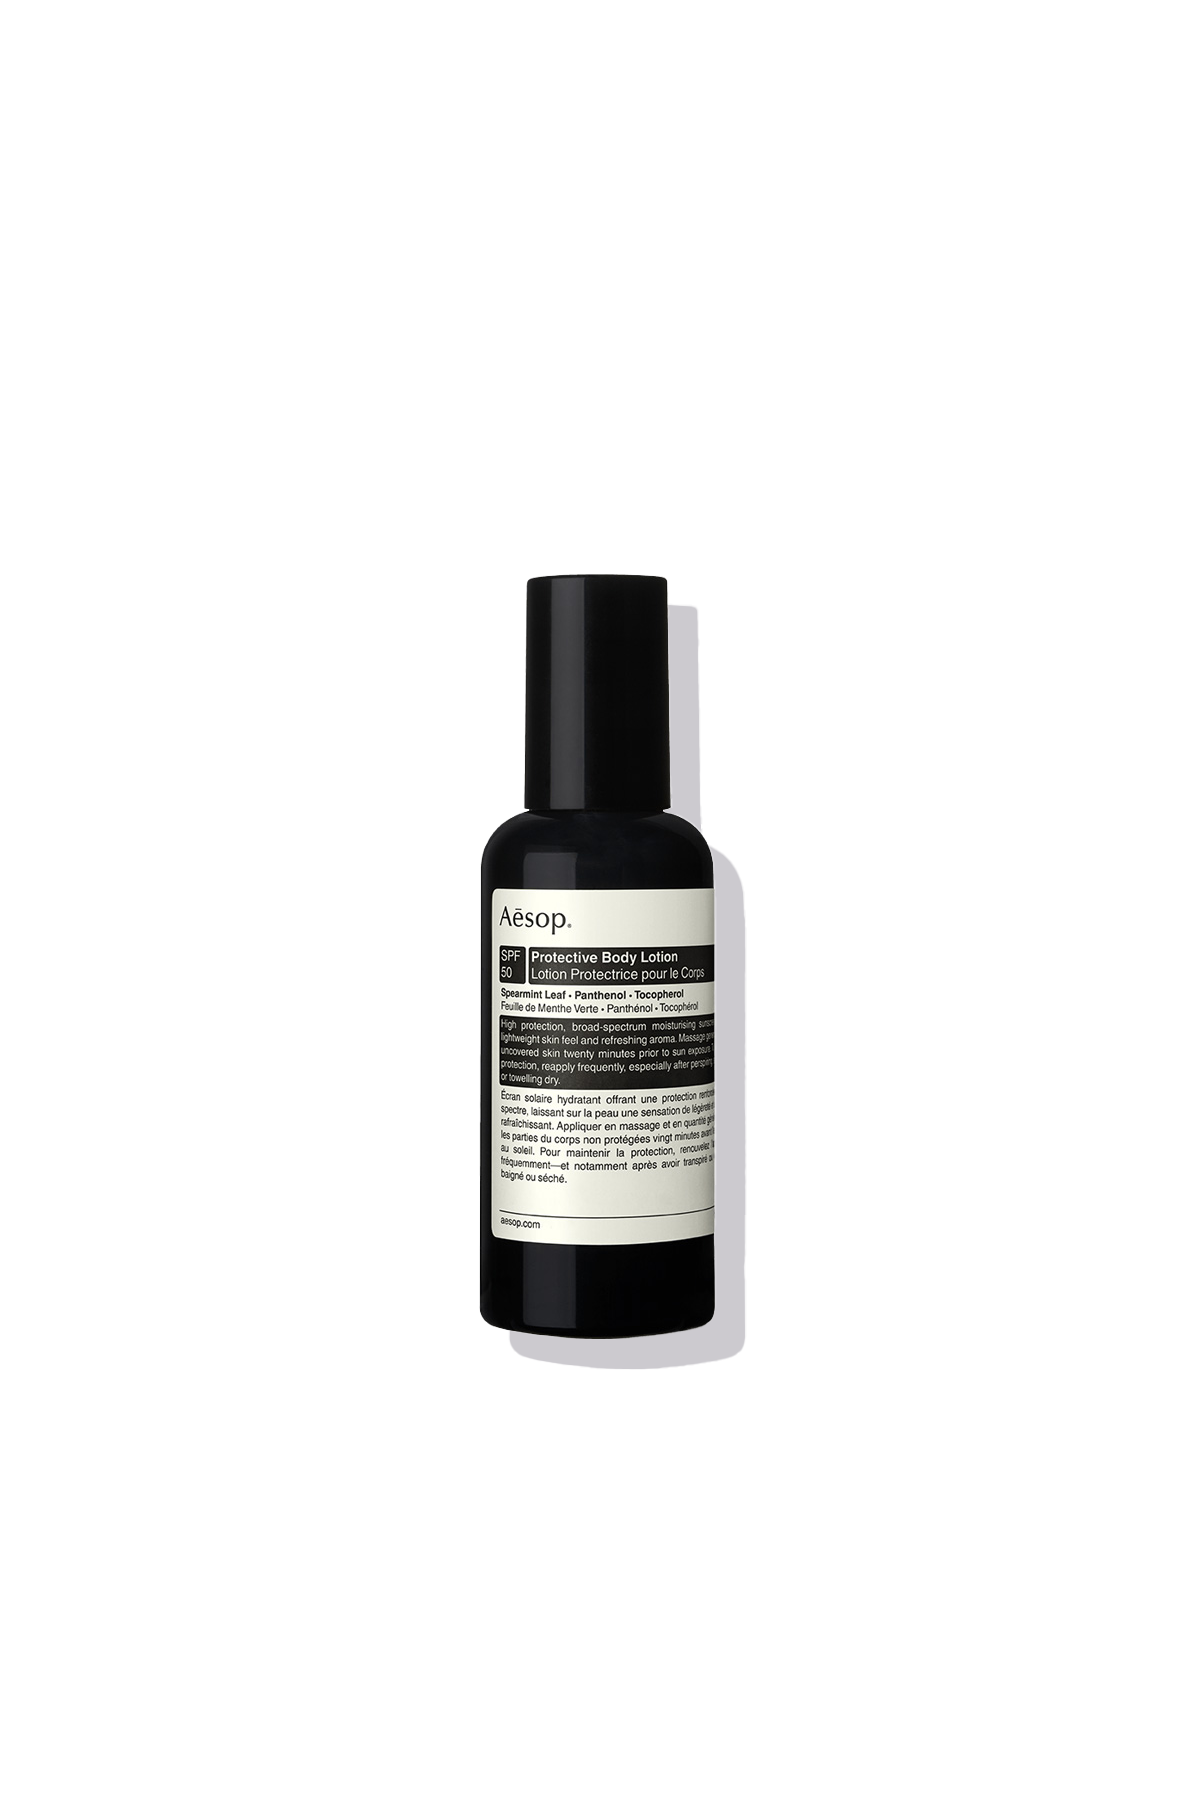 Aesop SPF50 Protective Body Lotion